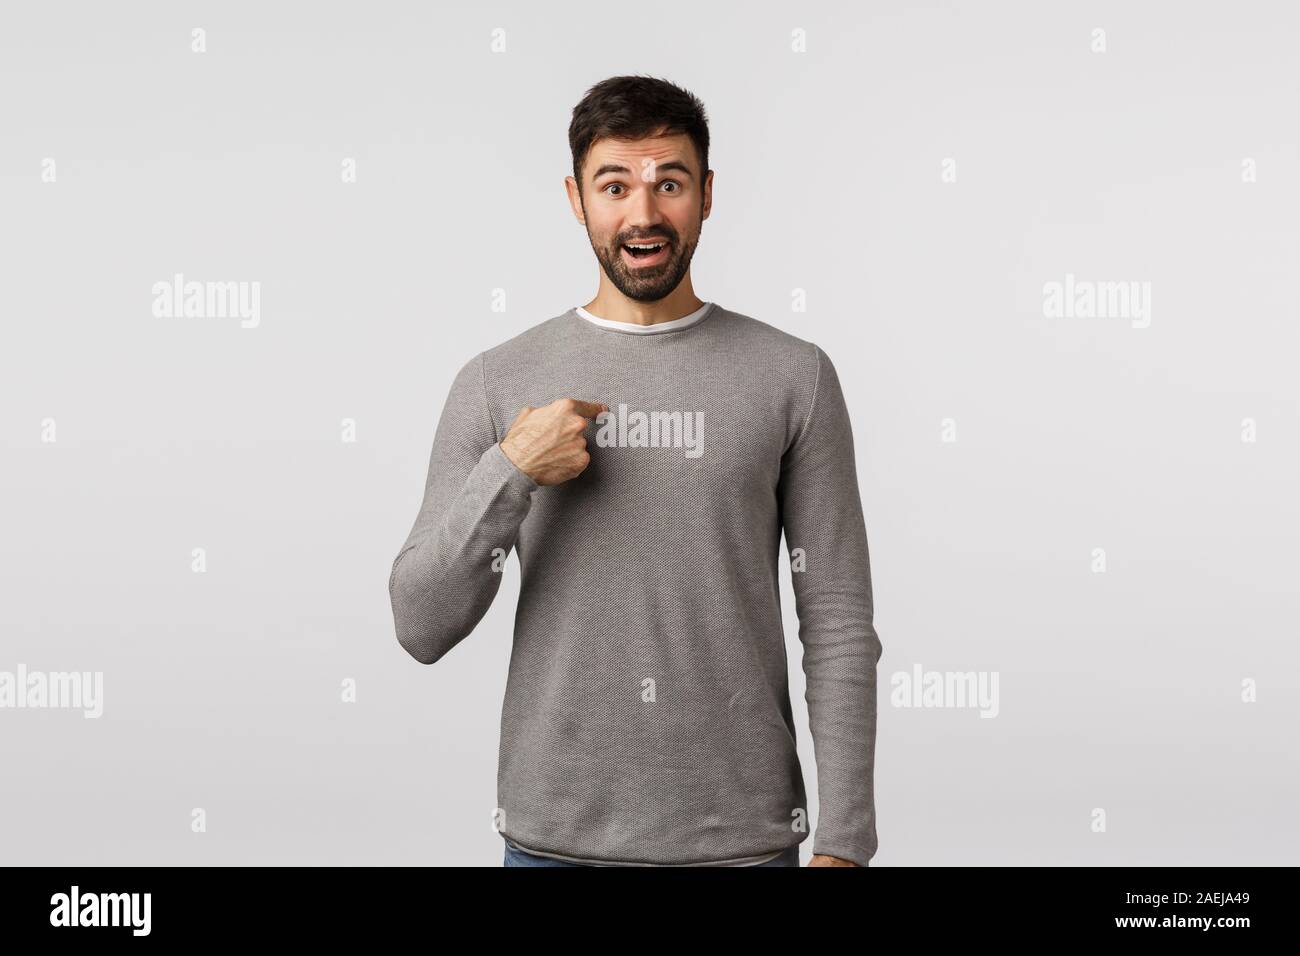 Who Me Really Surprised And Happy Young Man Being Chosen And Pointing Himself With Amazed Smile Feeling Grateful And Relieved Was Picked Stock Photo Alamy